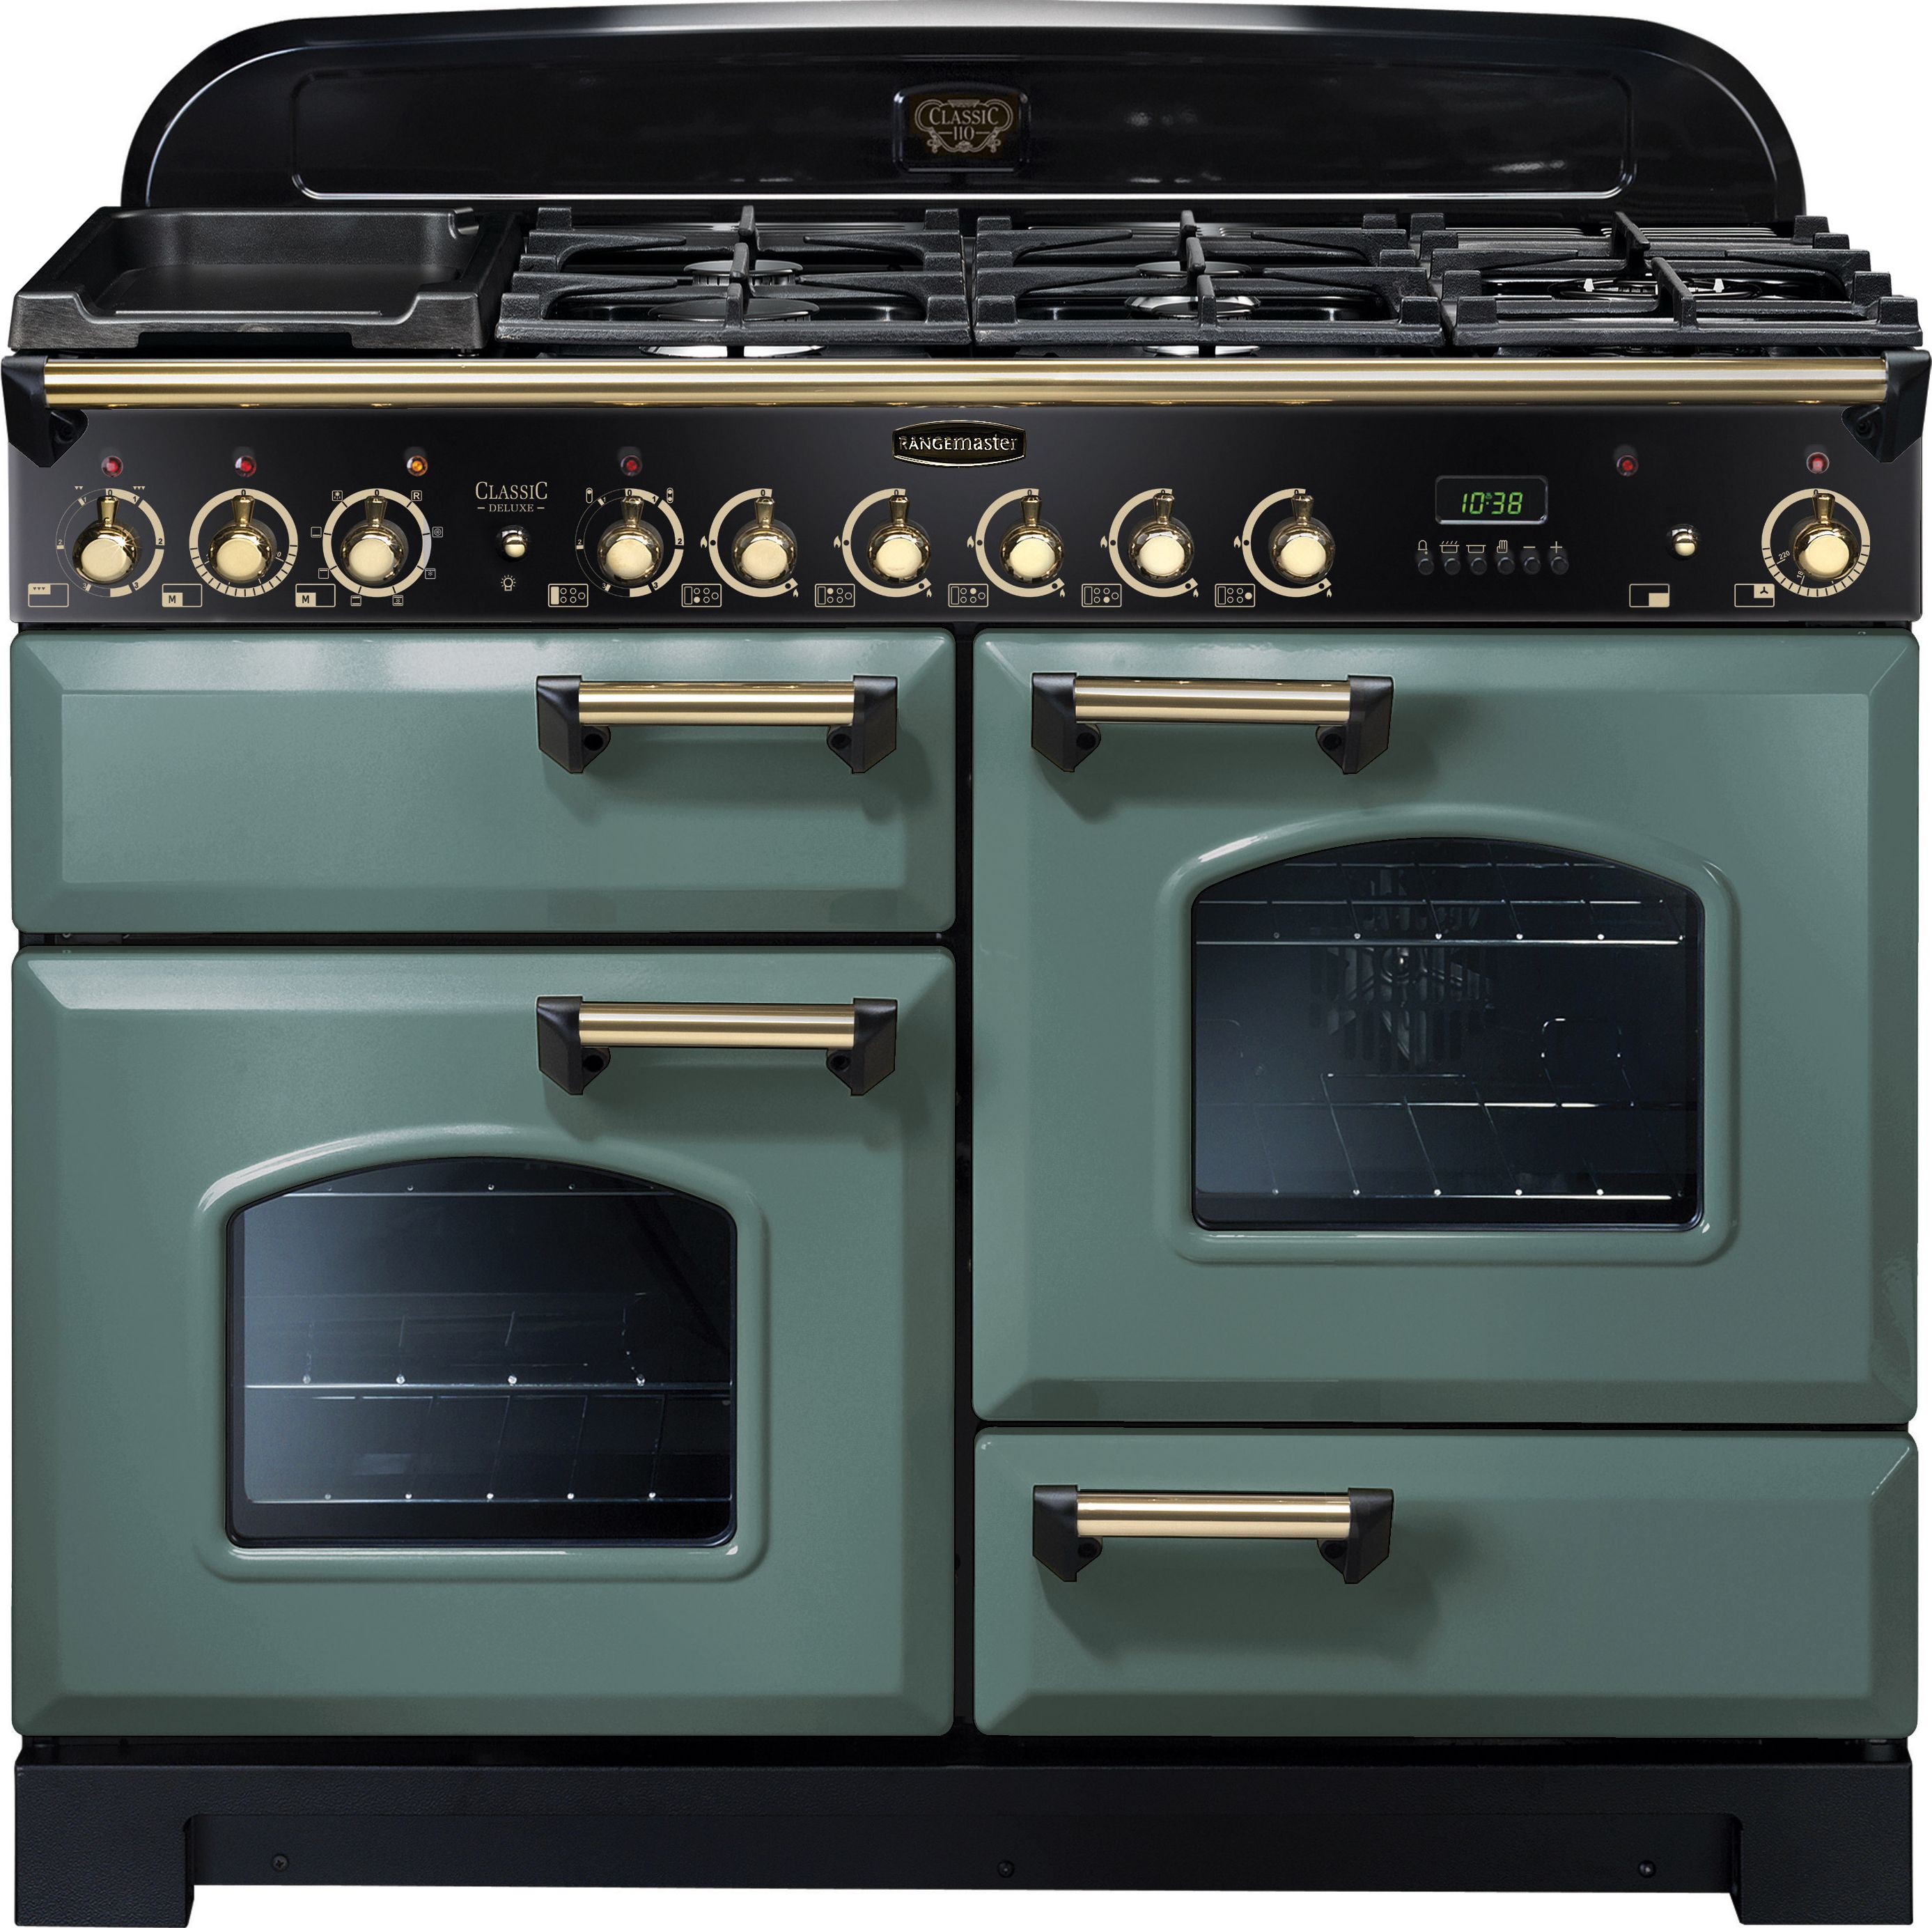 Rangemaster Classic Deluxe CDL110DFFMG/B 110cm Dual Fuel Range Cooker - Mineral Green / Brass - A/A Rated, Green